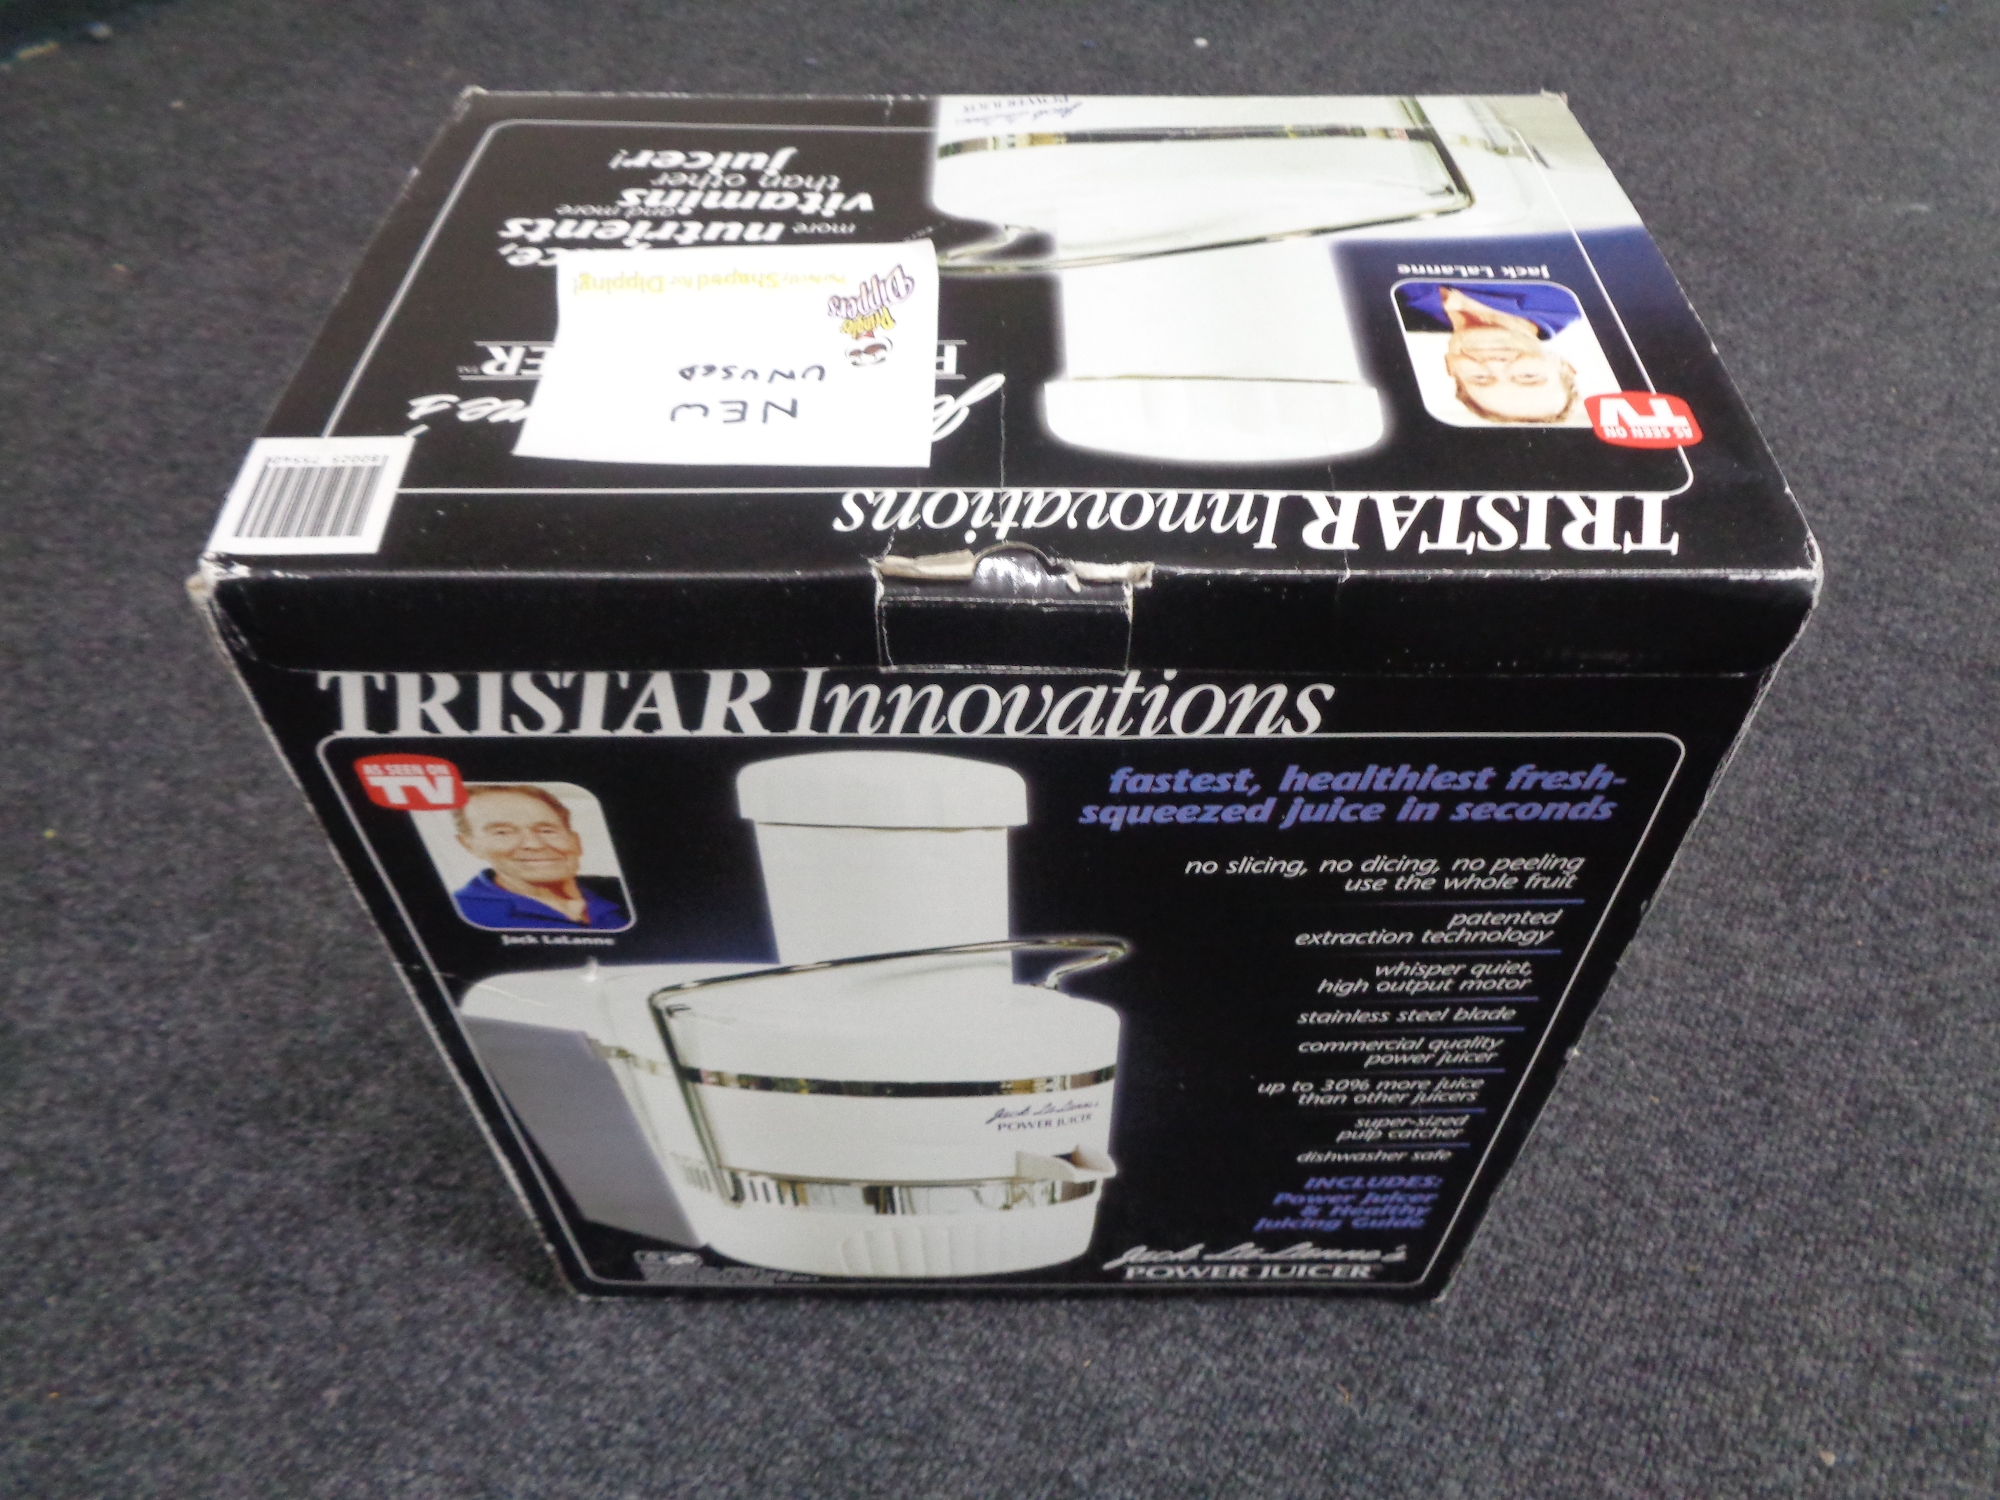 A boxed Tristar power juicer.